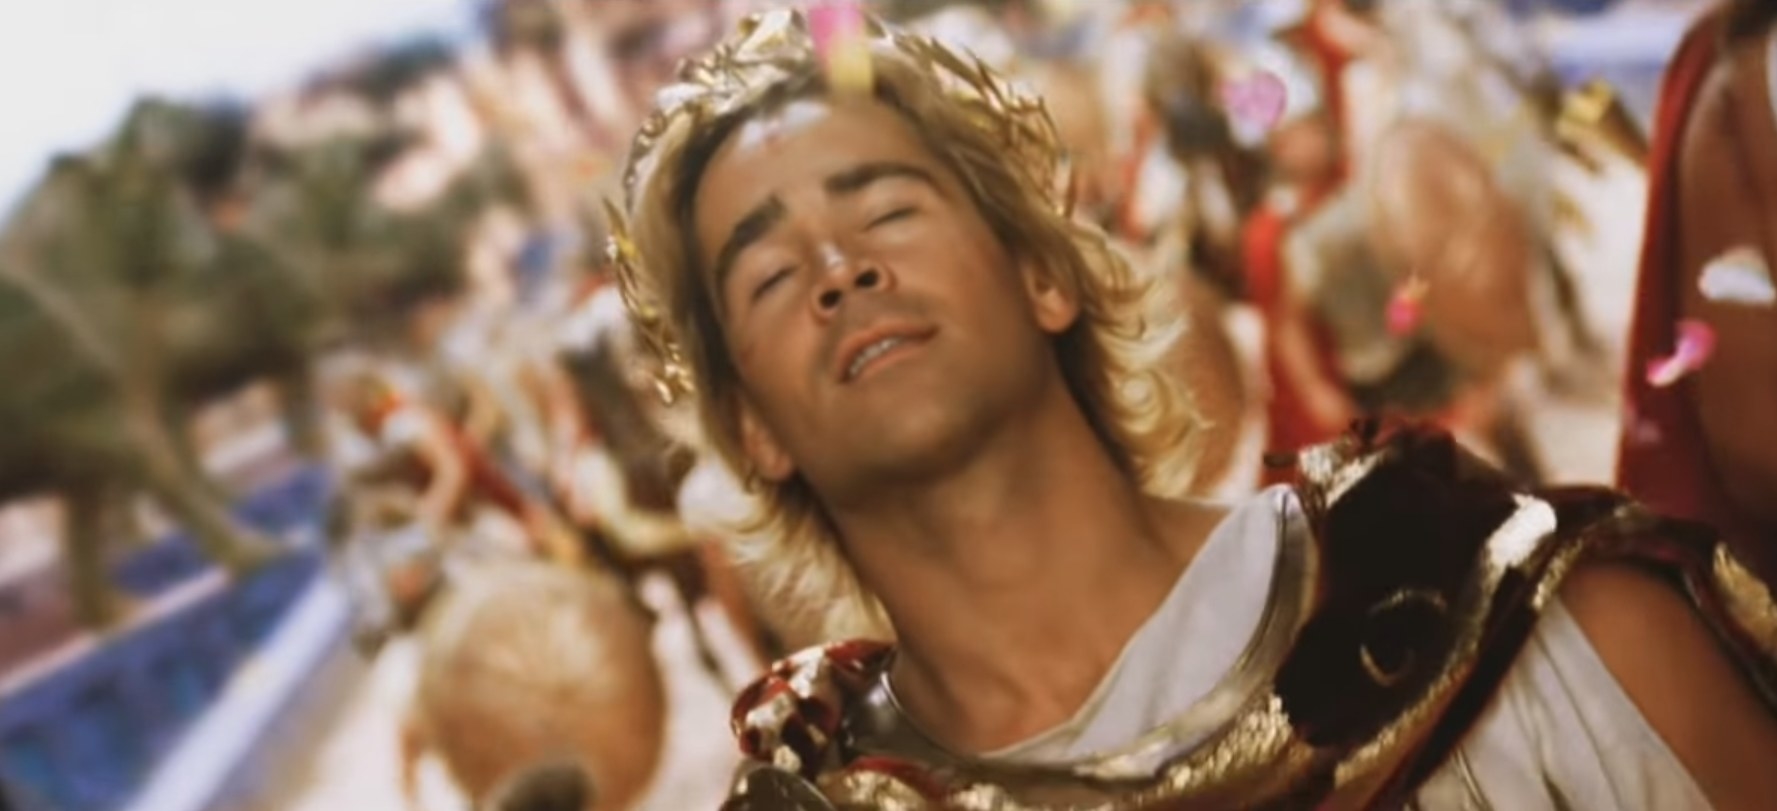 Colin Farrell as Alexander the Great, looking happy in the middle of a parade